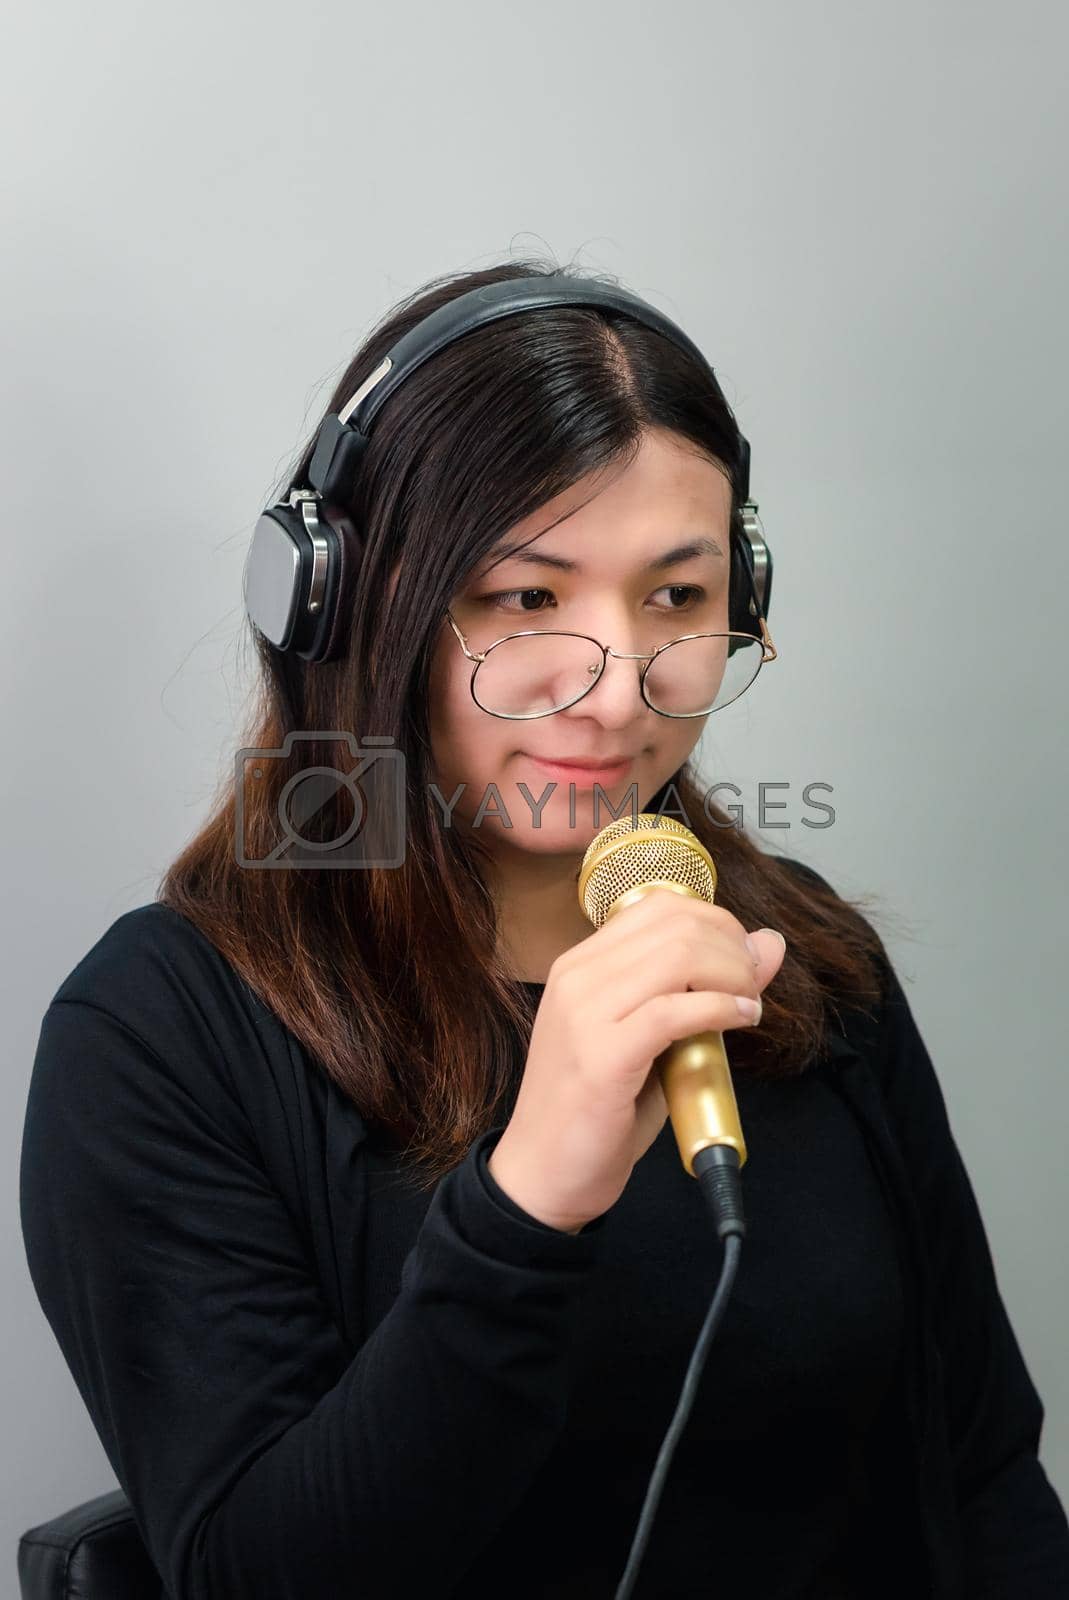 Royalty free image of Woman (LGBTQ) singer sing a song with microphone by NongEngEng